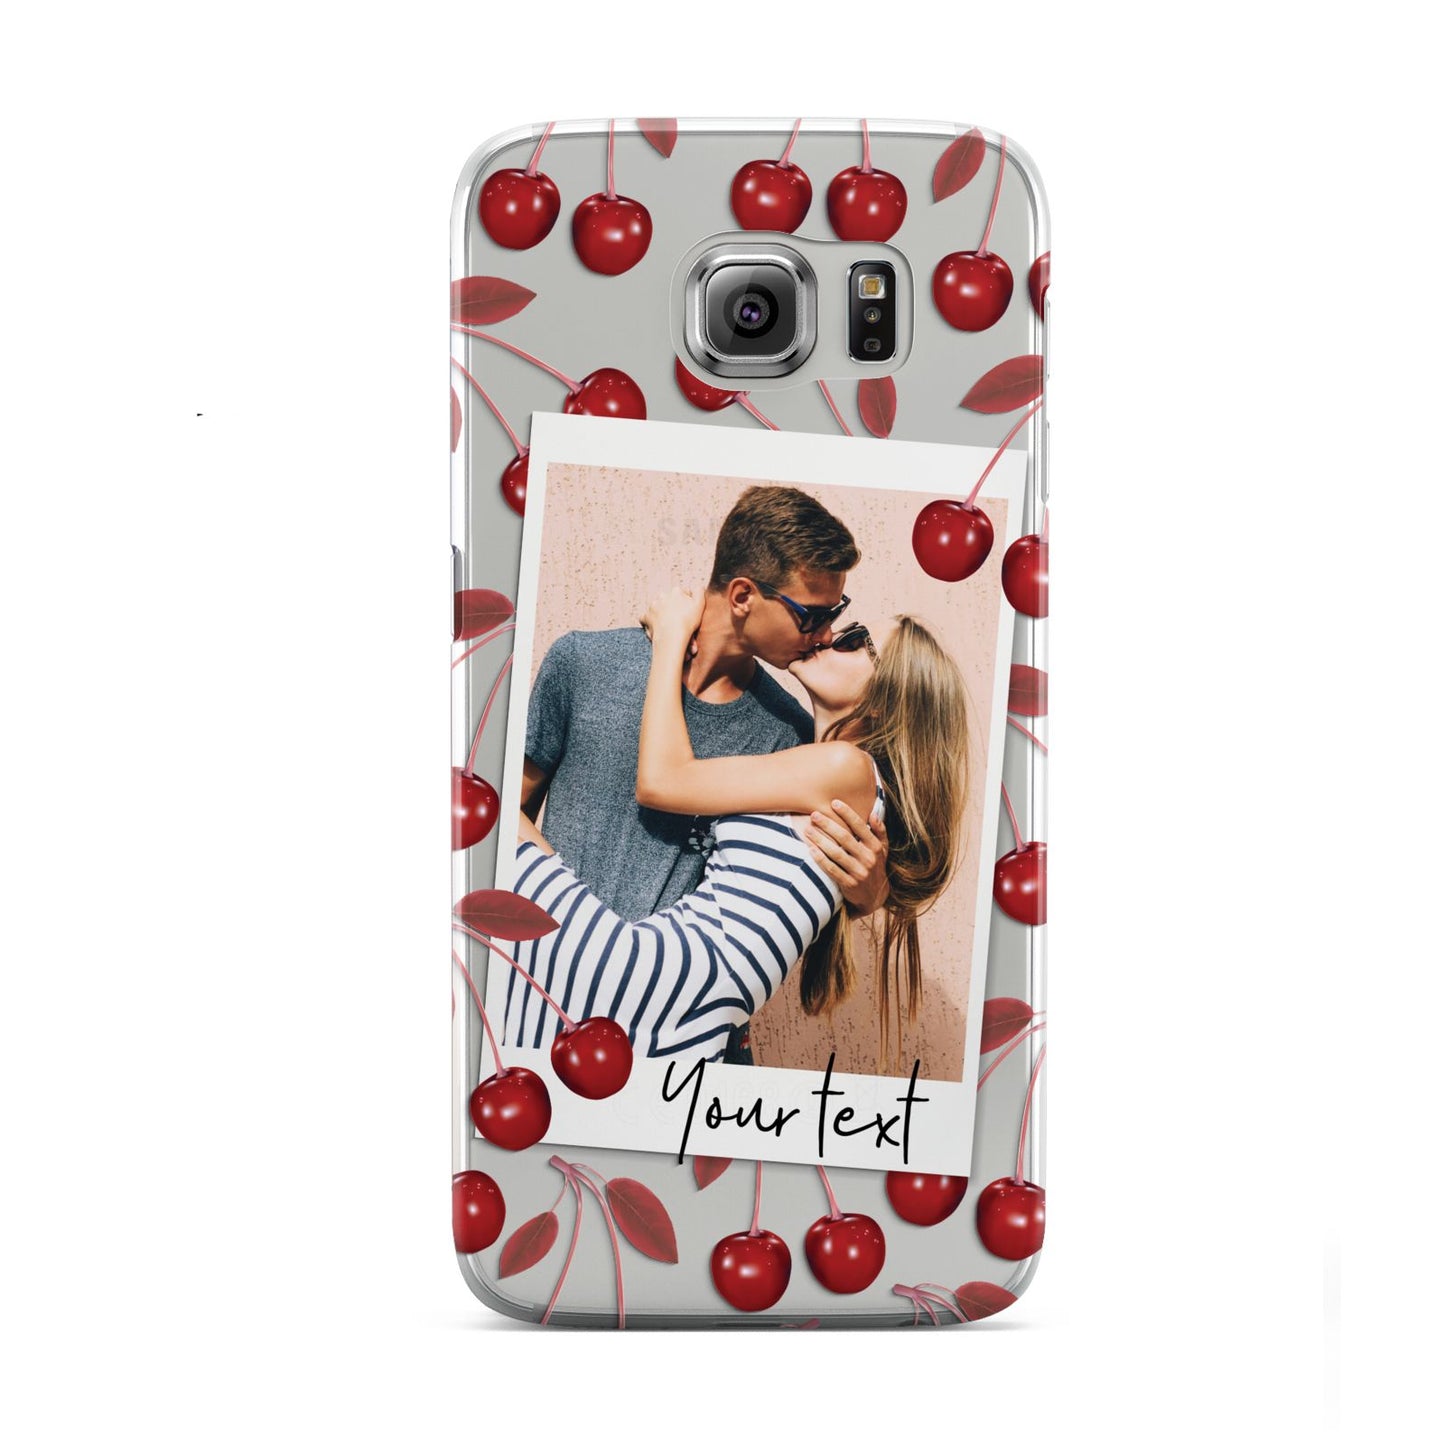 Personalised Photo Cherry Samsung Galaxy S6 Case